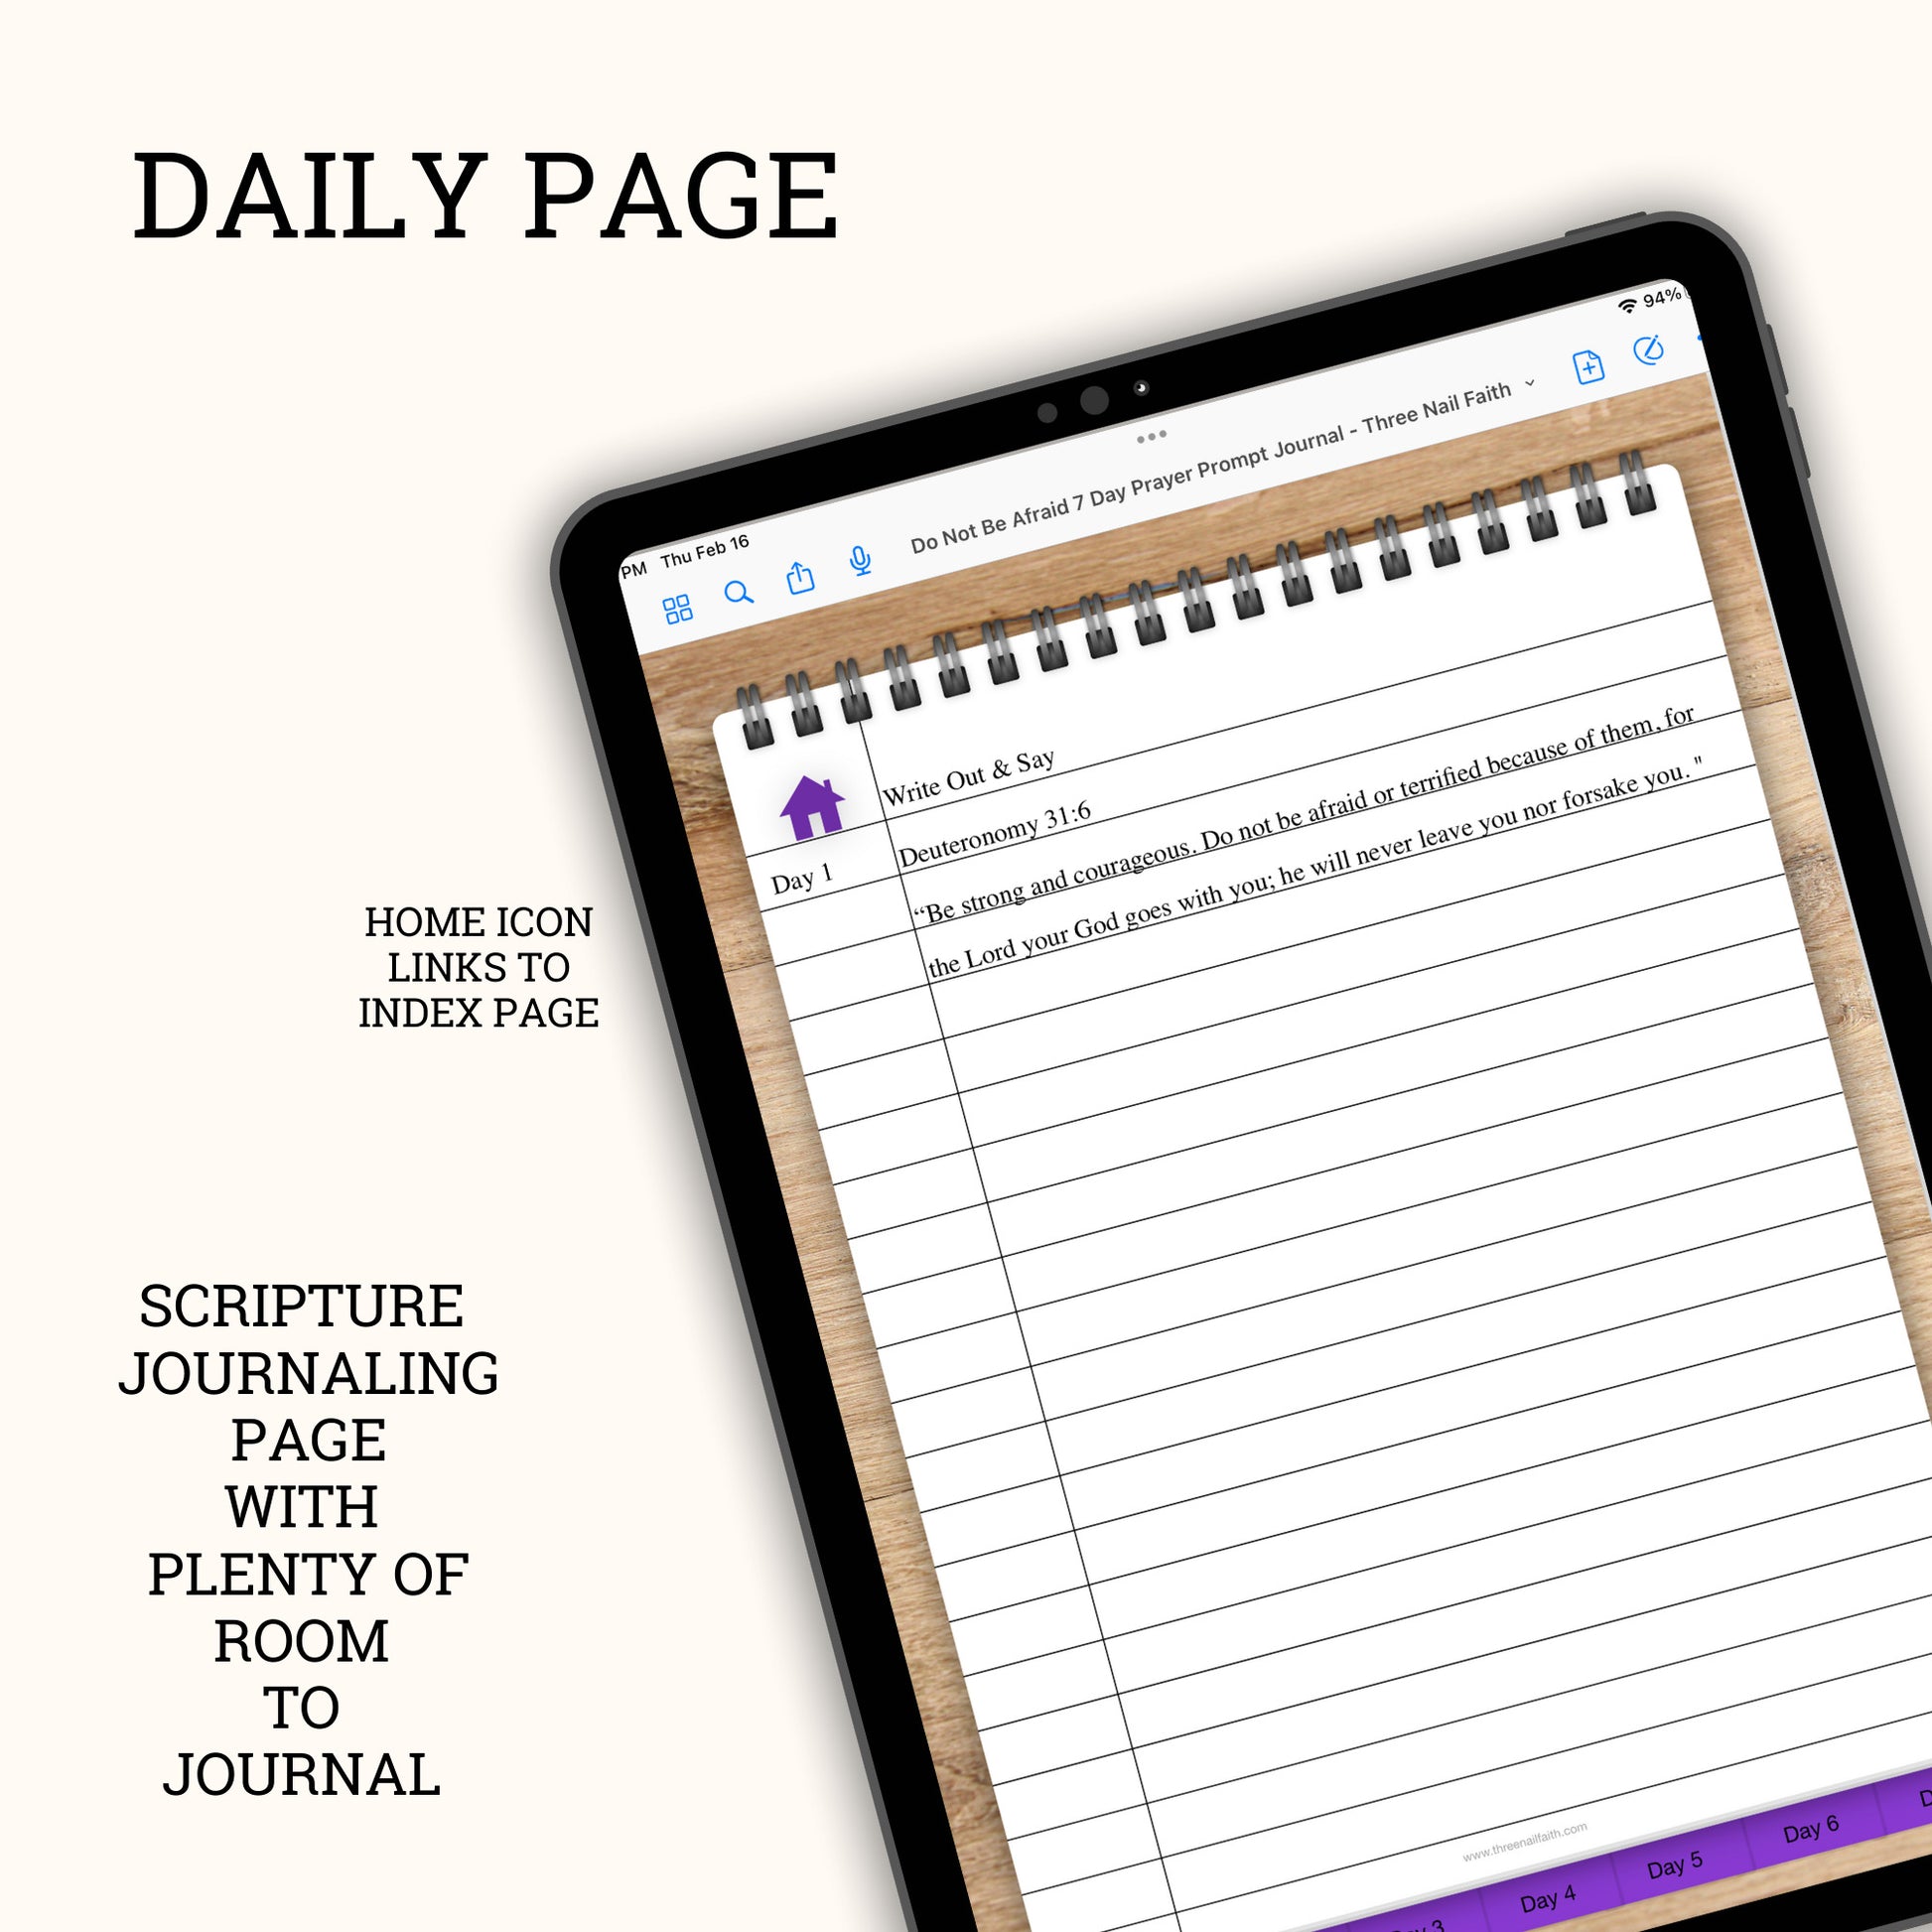 7 Day Scripture Memory Verse Digital Journal, Deuteronomy 31:6, Do Not Be Afraid Daily page